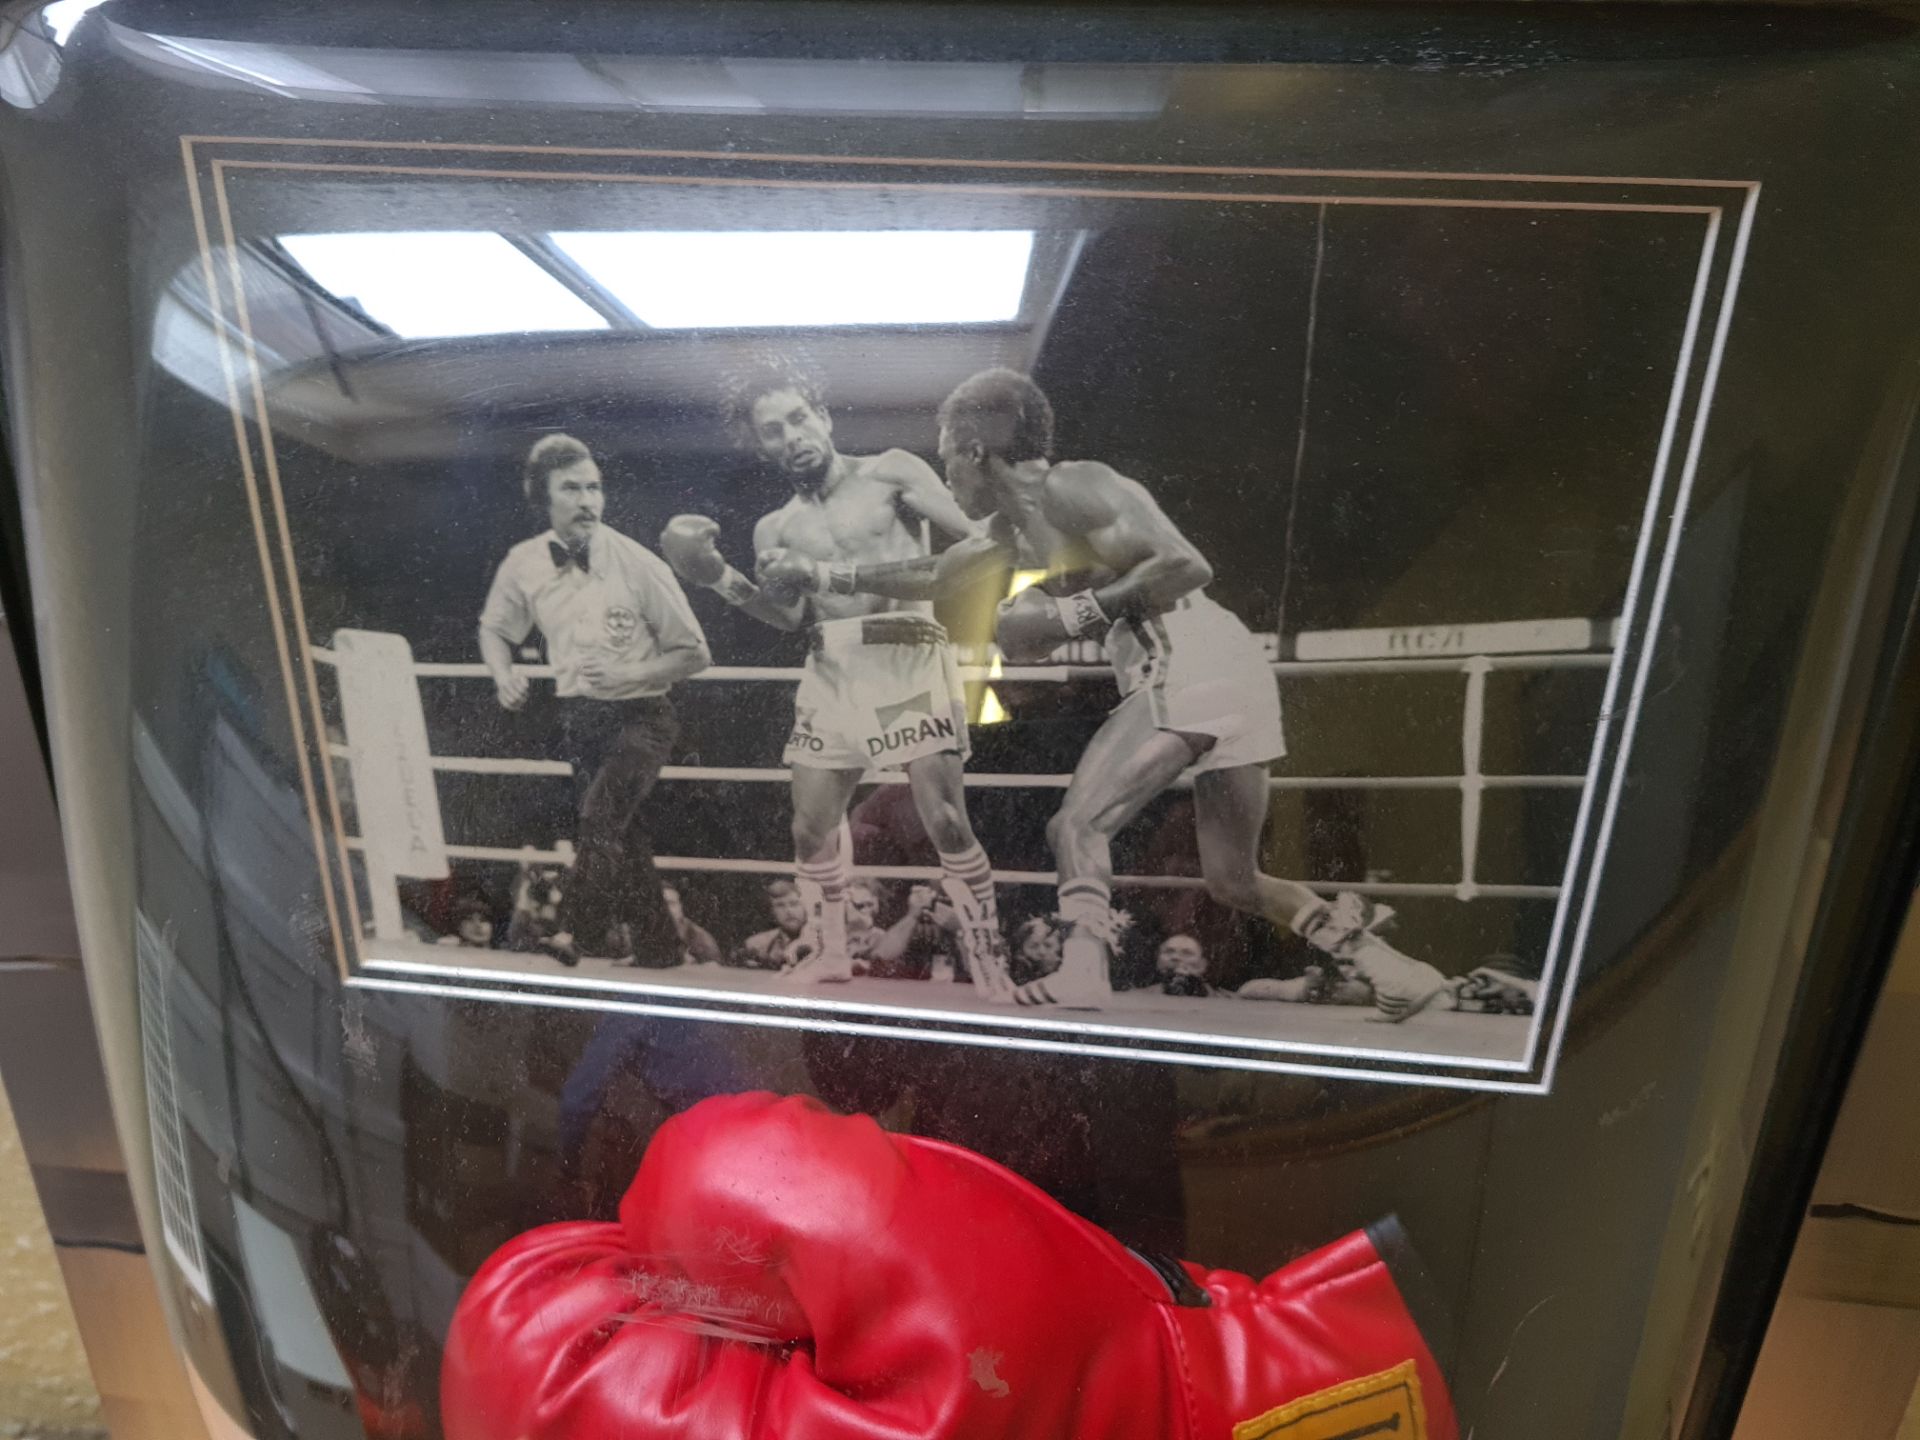 Signed Framed Photo and S Boxing Glove (Roberto Duran v Sugar Ray Leonard), signed by Duran and - Image 3 of 4